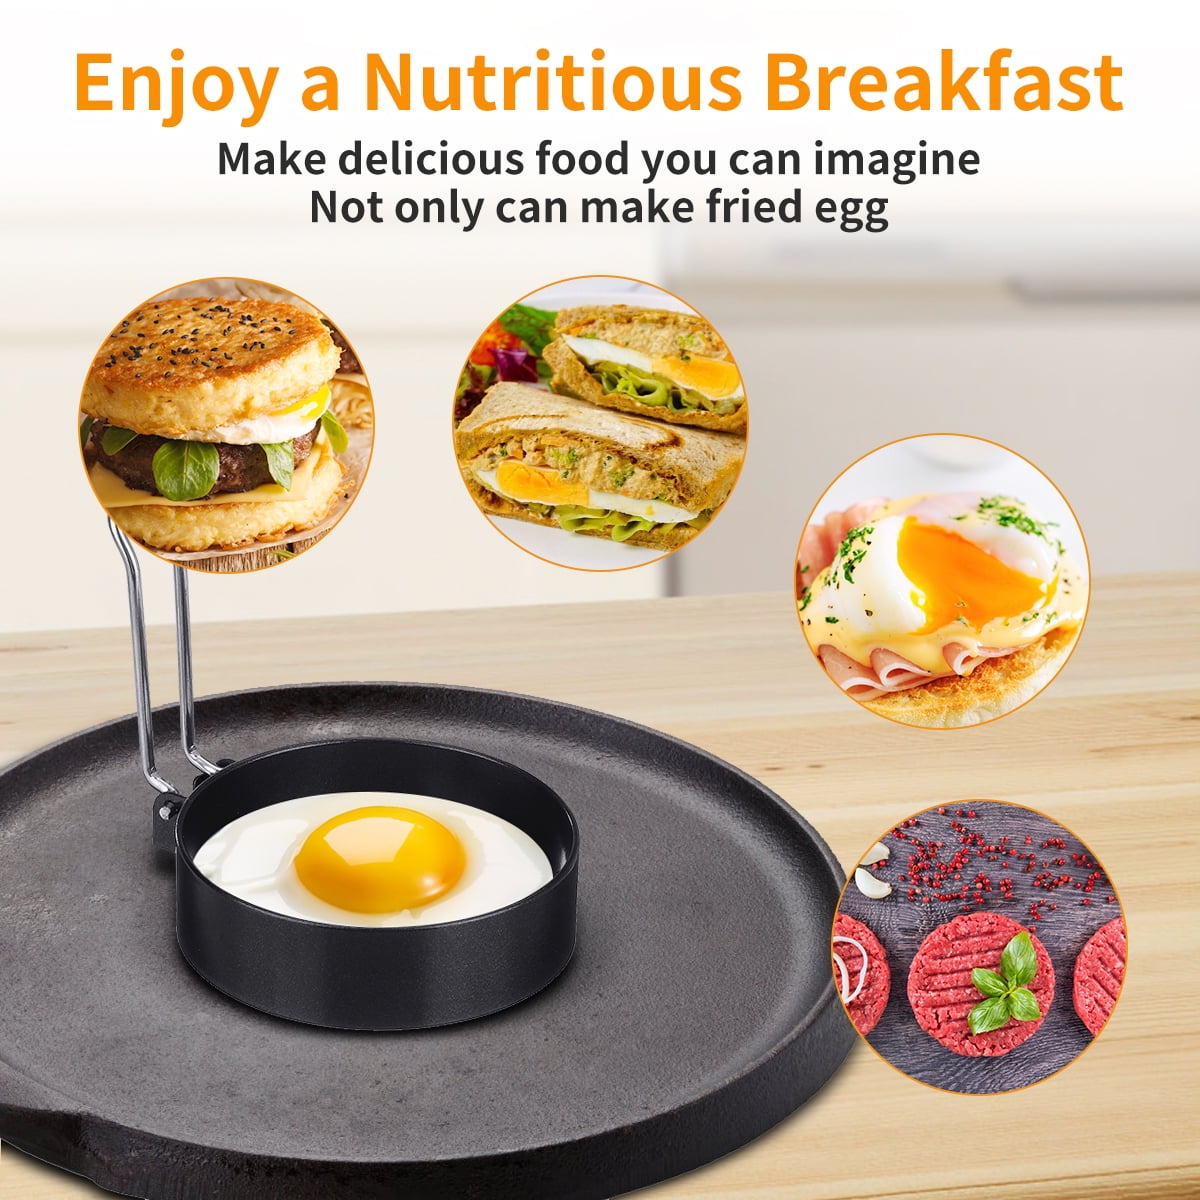 Silicone Egg Rings Round - NUIBY Non Stick Fried Egg Mold - Pancakes Maker  Molds - Breakfast Egg Sandwich Cooker Maker - 4 Pack 4 Color, with Bonus 1